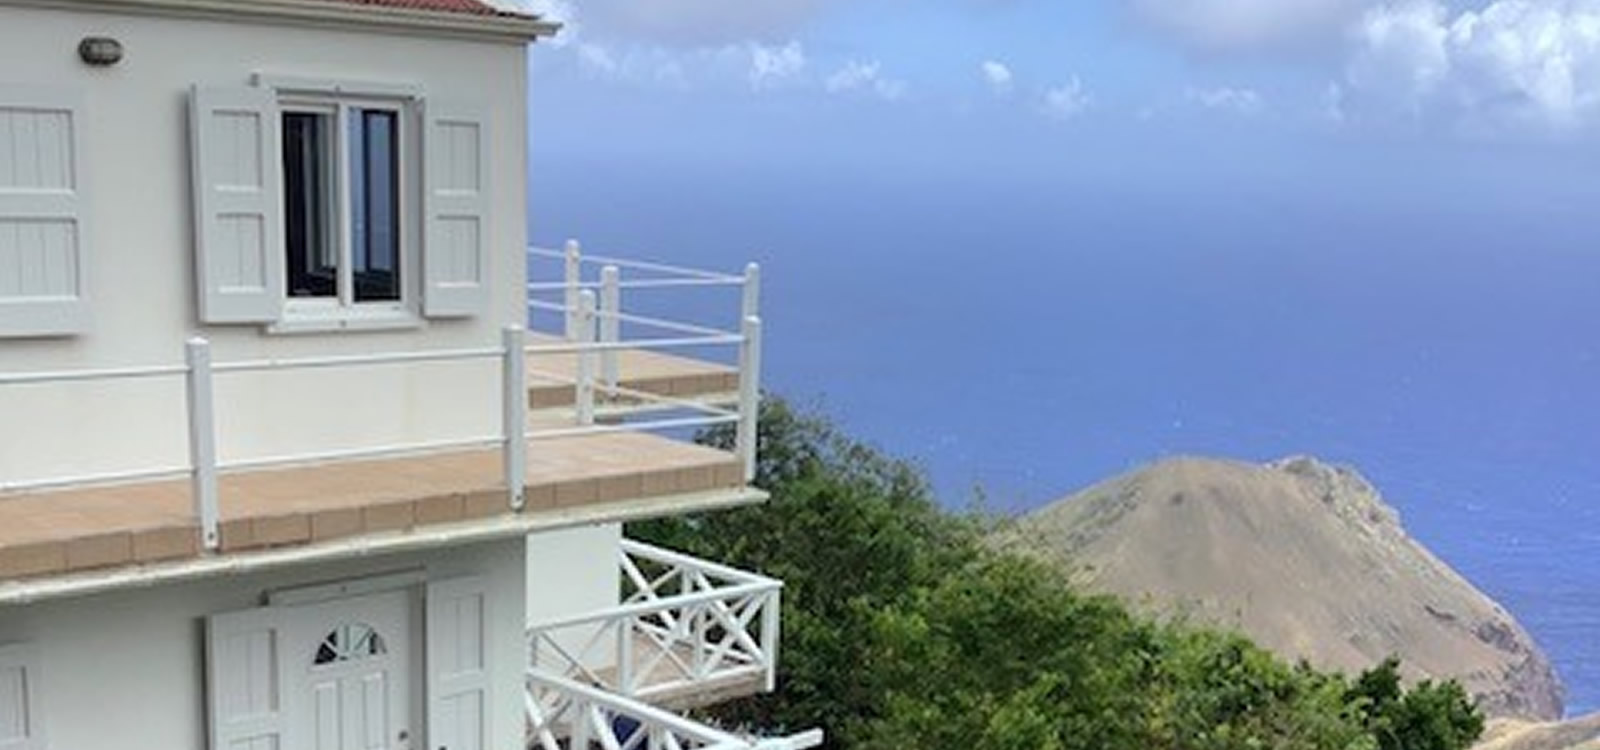 4 Bedroom Home for Sale, Zions Hill, Saba - 7th Heaven ...